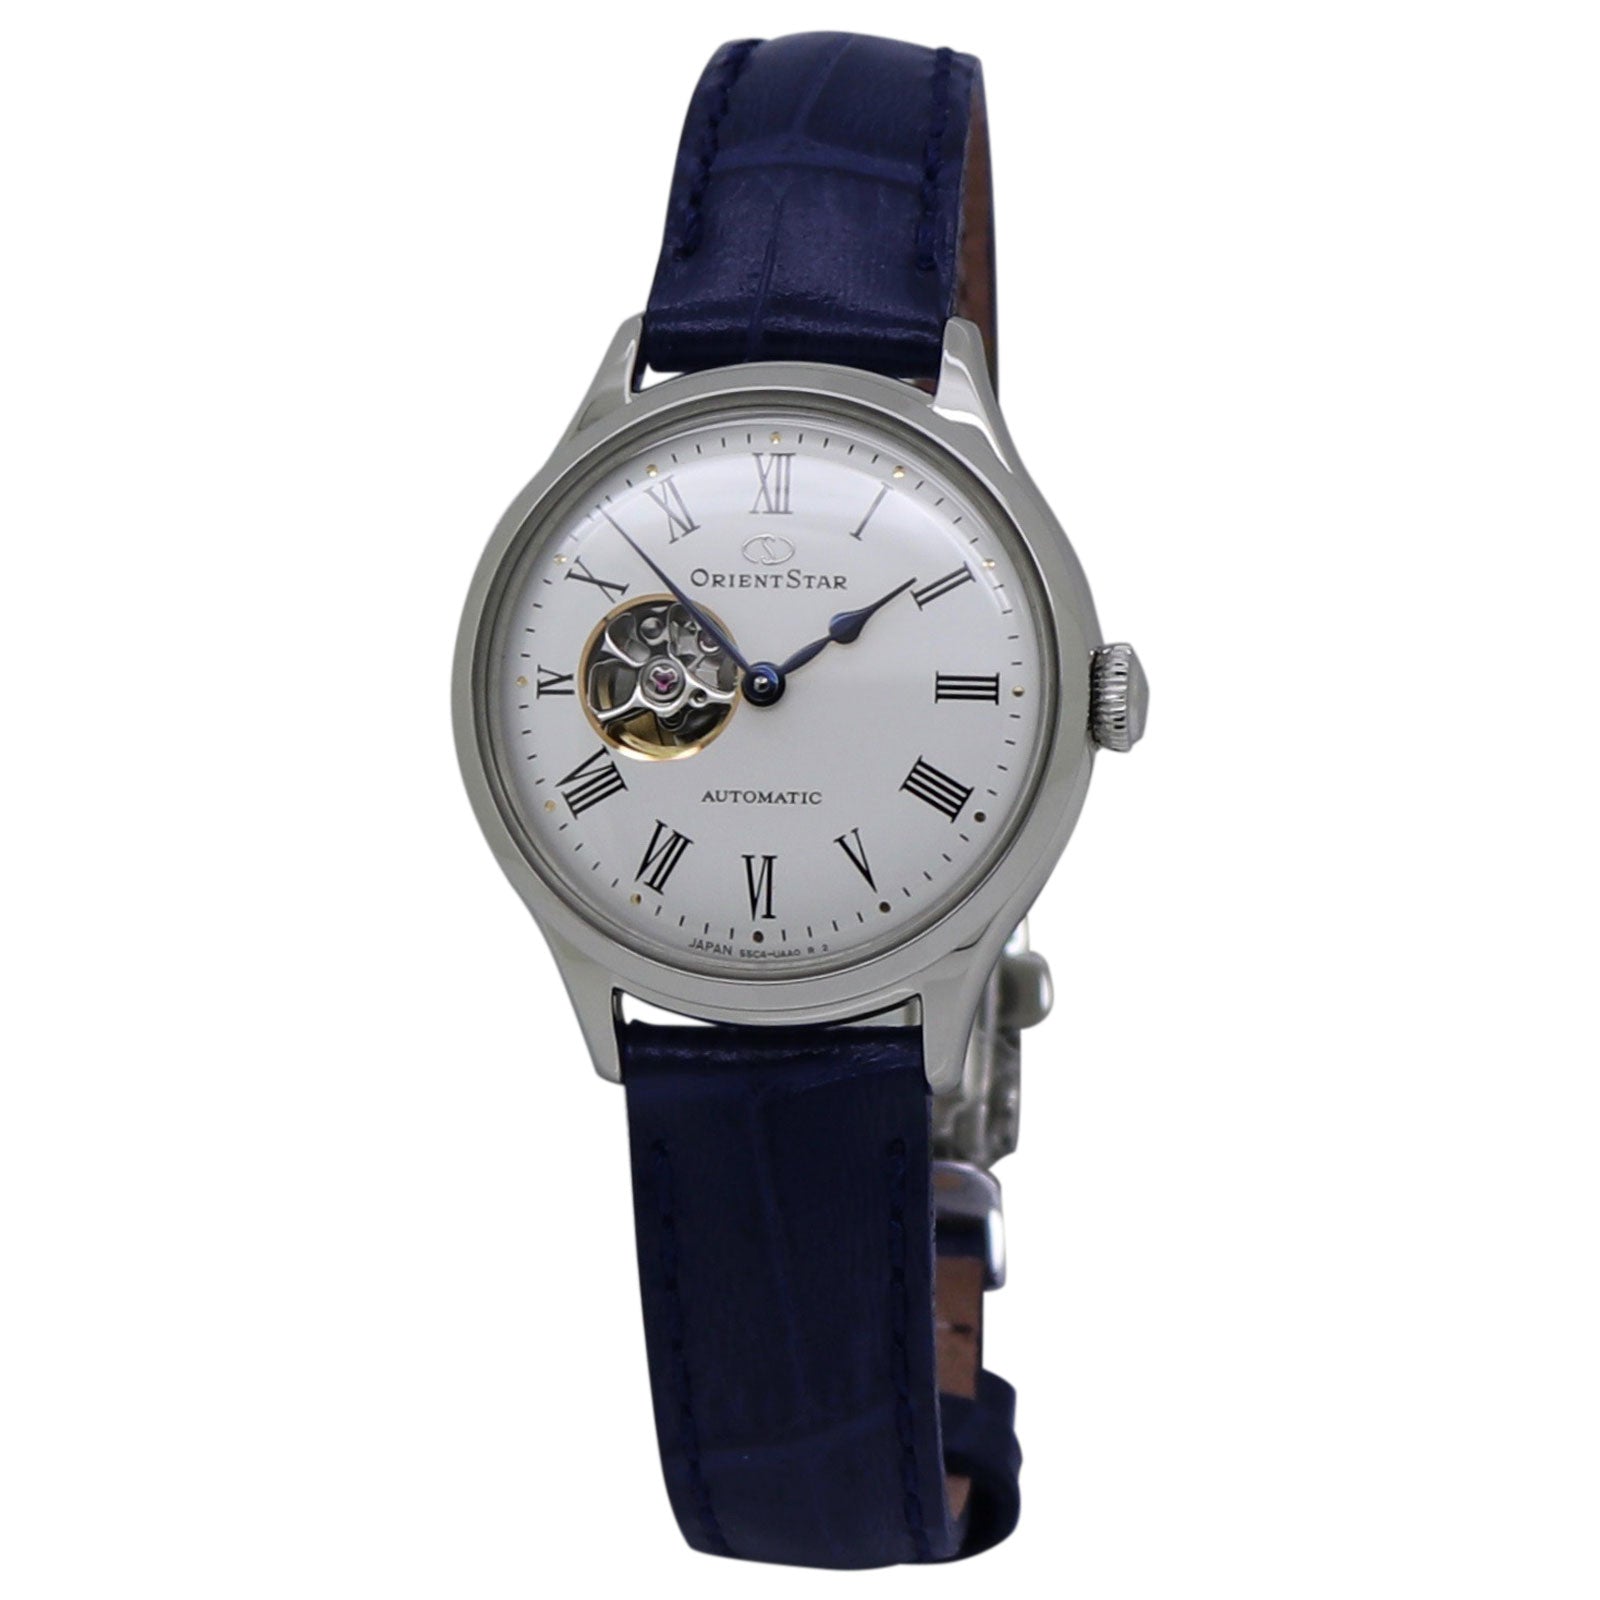 Orient Star Open Heart White Dial Blue Leather Strap Ladies Dress Watch